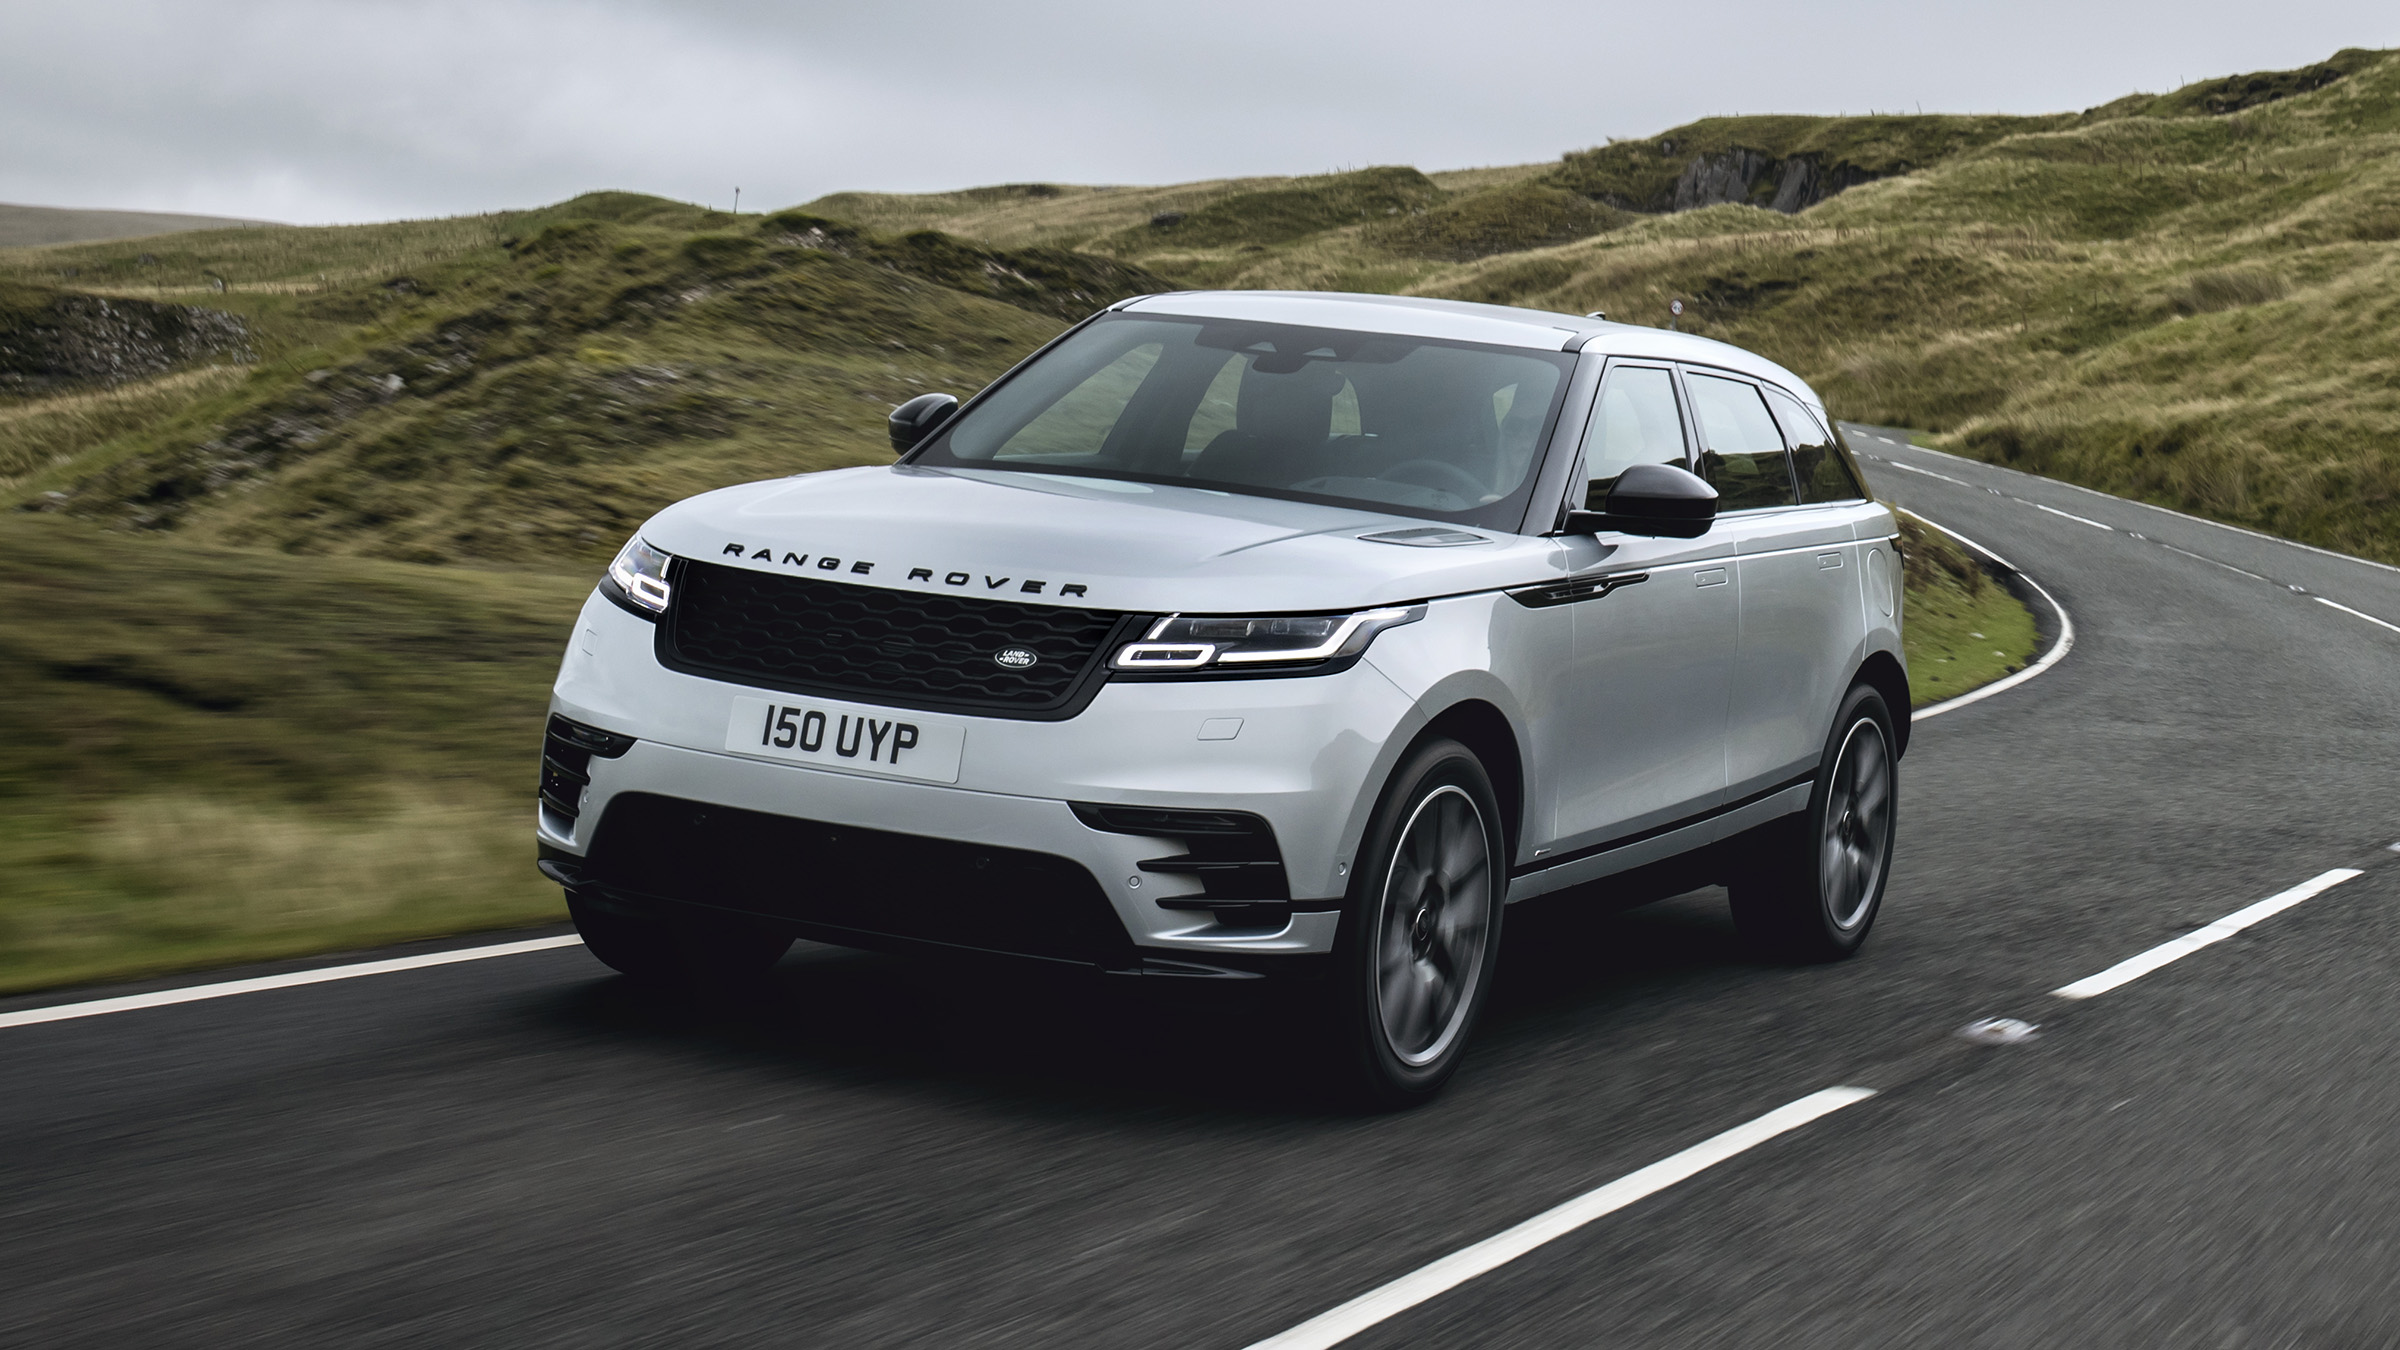 Range Rover Hybrid Bik Rates  . Sporty Looks And Power Are Now Matched By Greater Efficiencies.